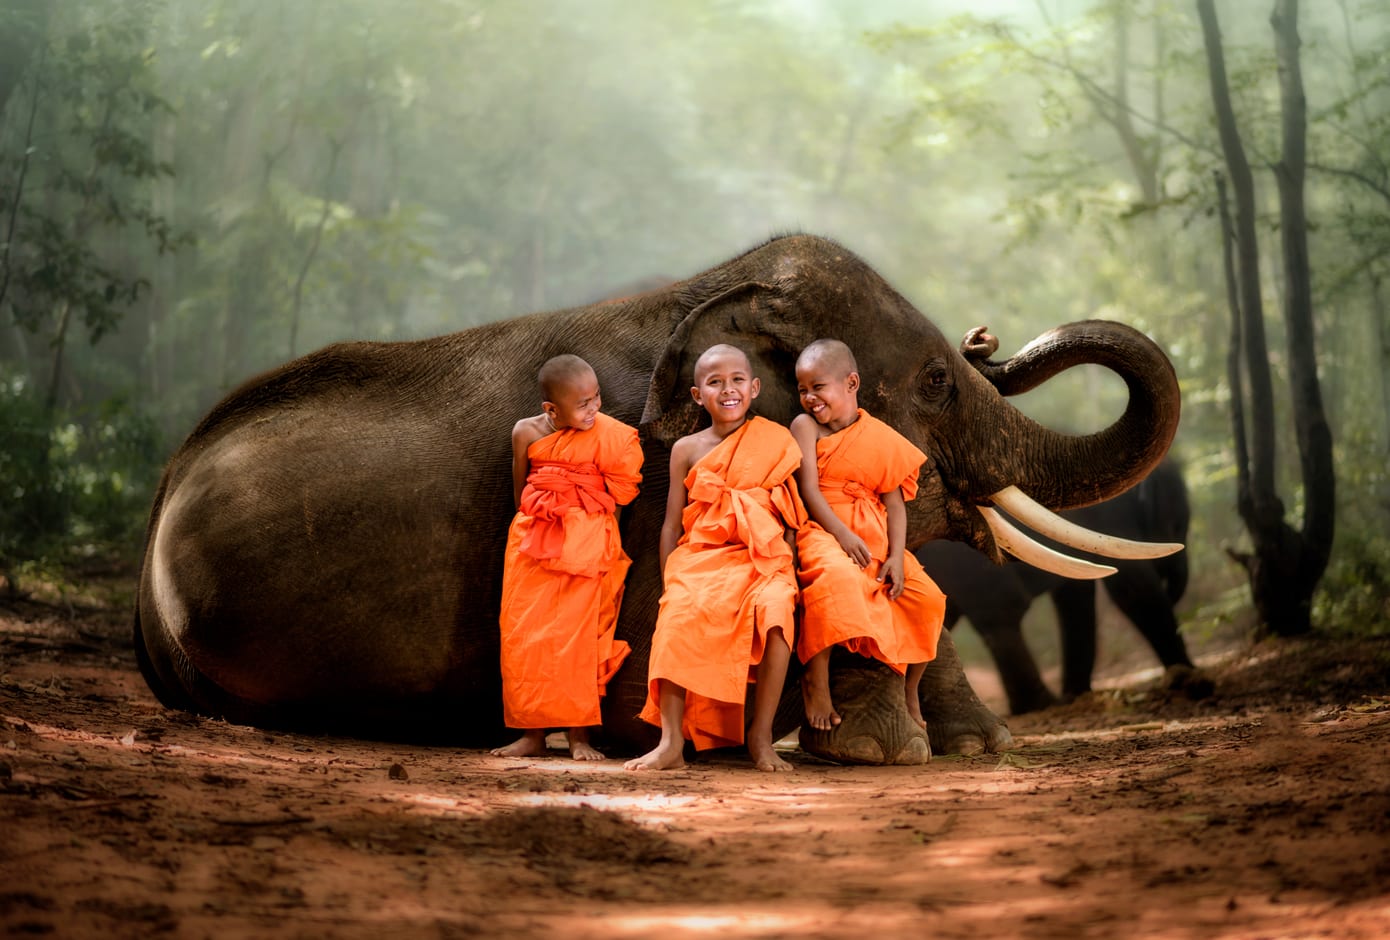 Three child Thai monks dressed in an orange robe, smiling while posing in front of an elephant.